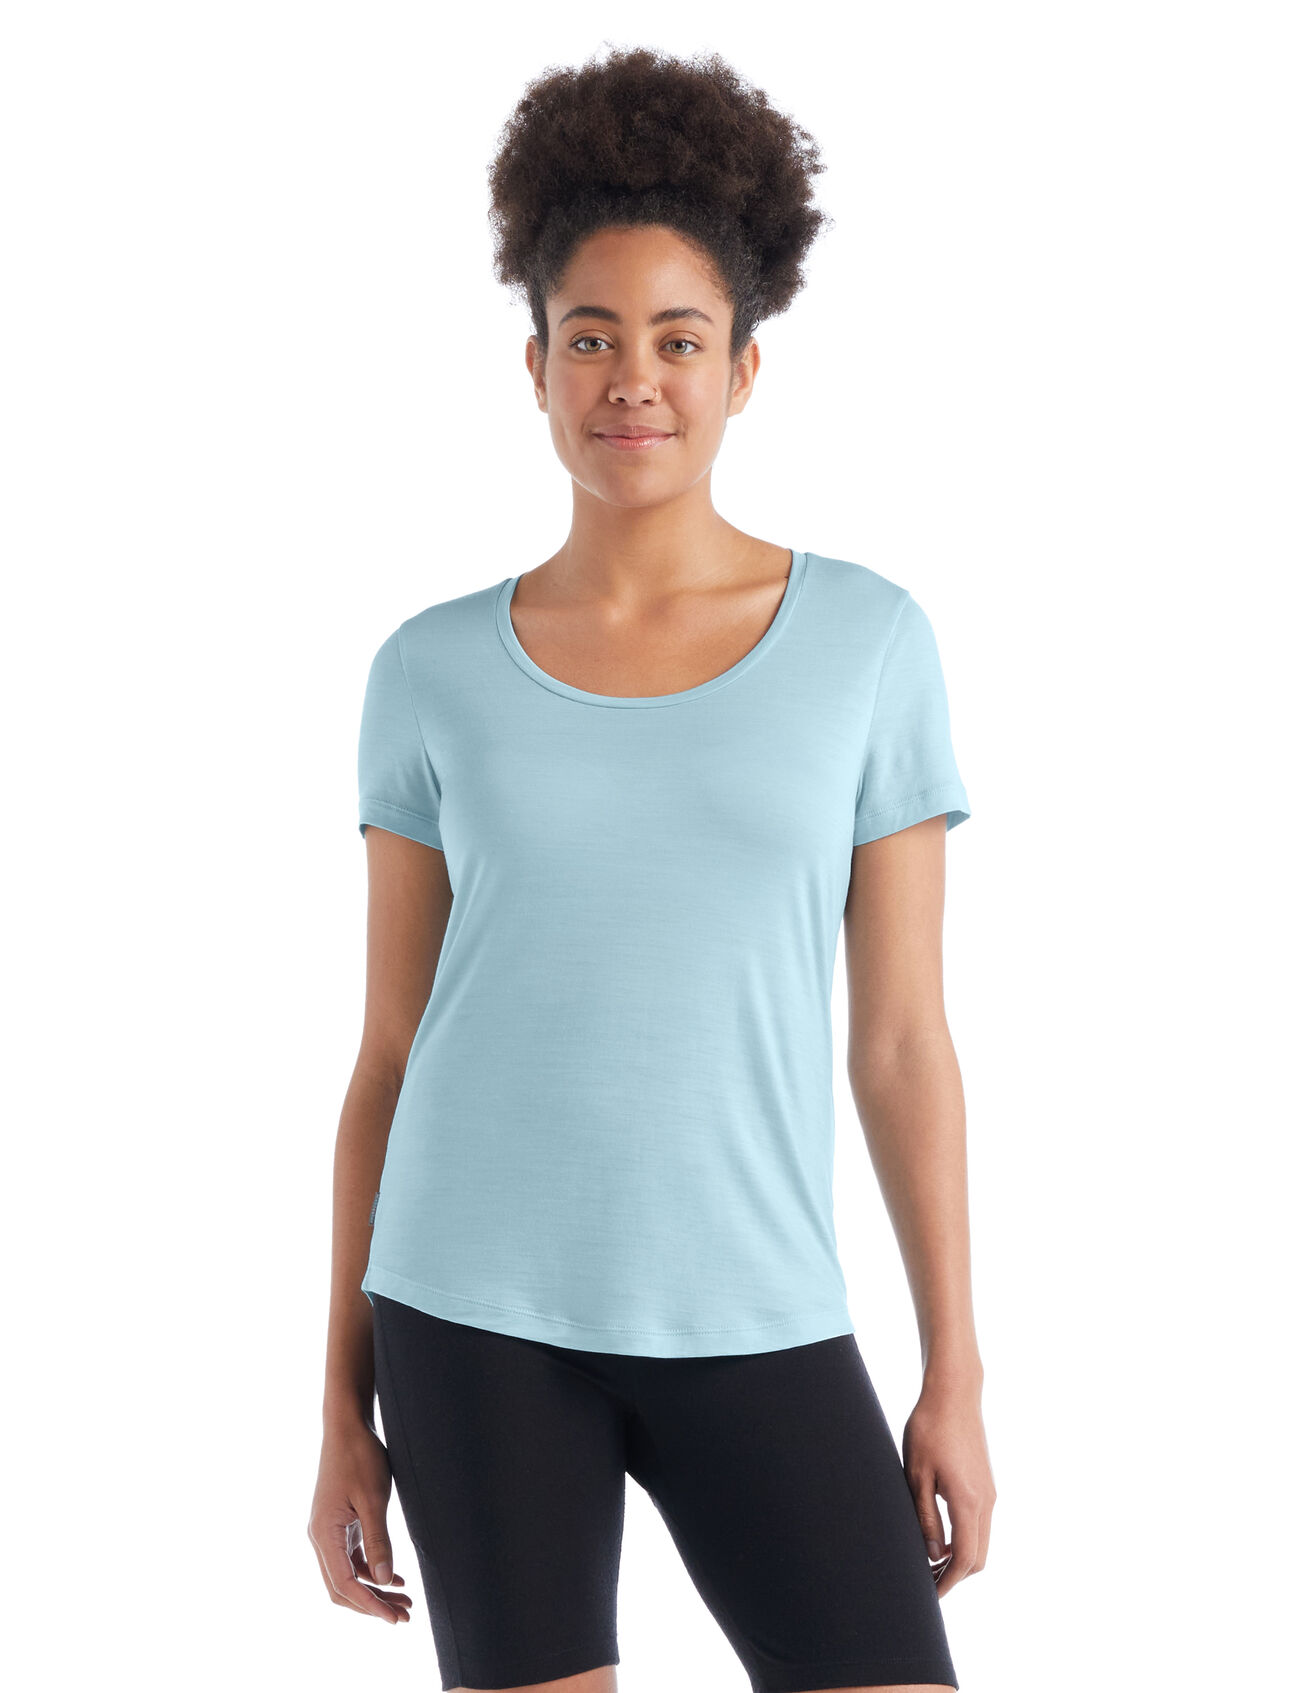 Womens Merino Sphere II Short Sleeve Scoop T-Shirt A soft merino-blend tee made with our lightweight Cool-Lite™ jersey fabric, the Sphere II Short Sleeve Scoop Tee provides natural breathability, odor resistance and comfort.